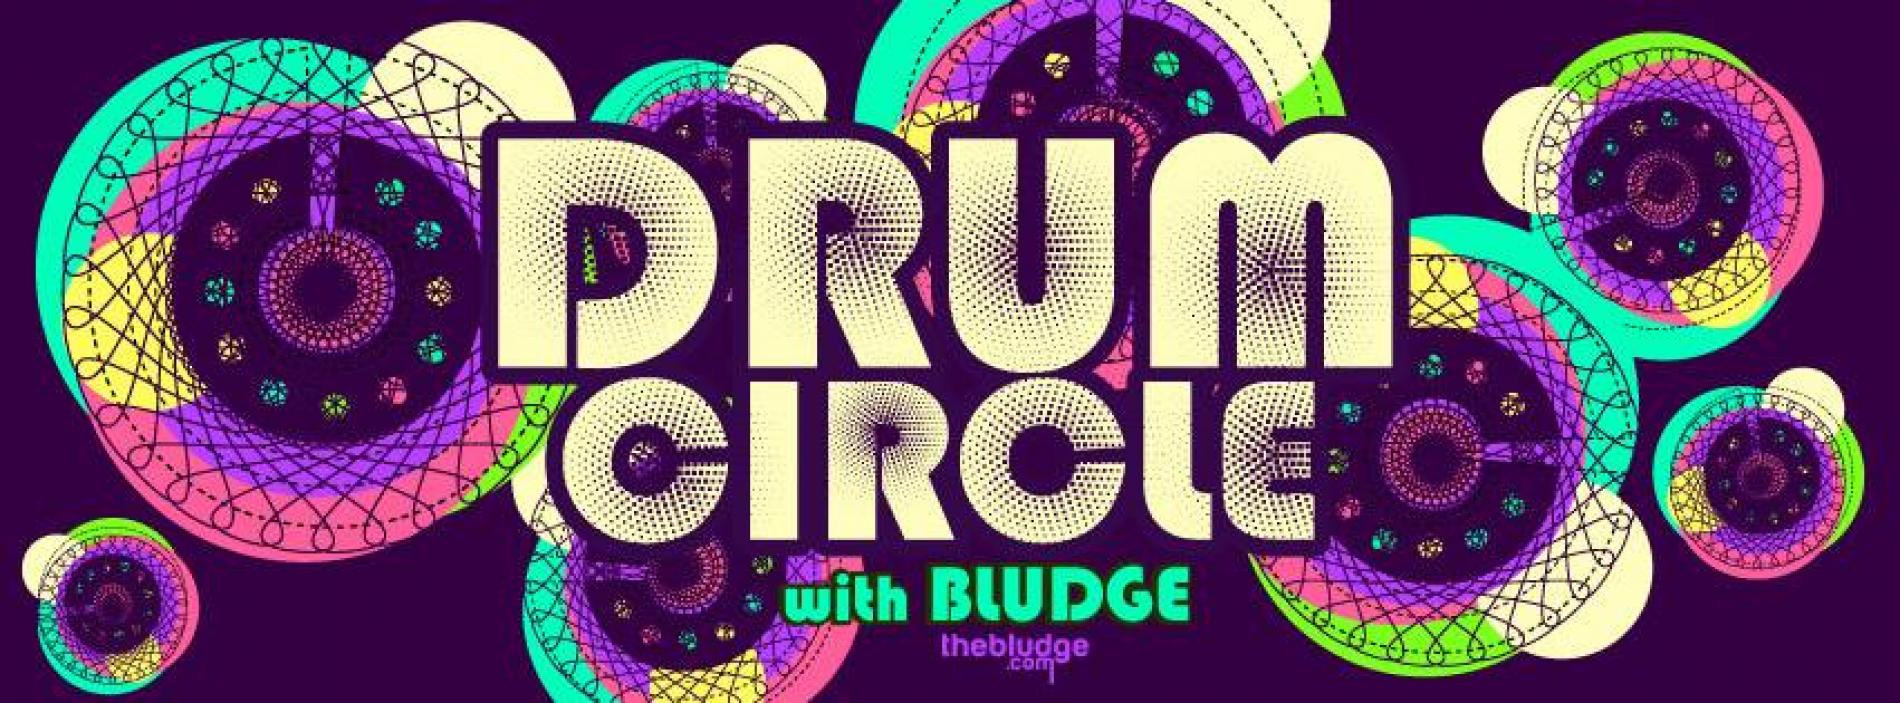 Drum Circles With Bludge